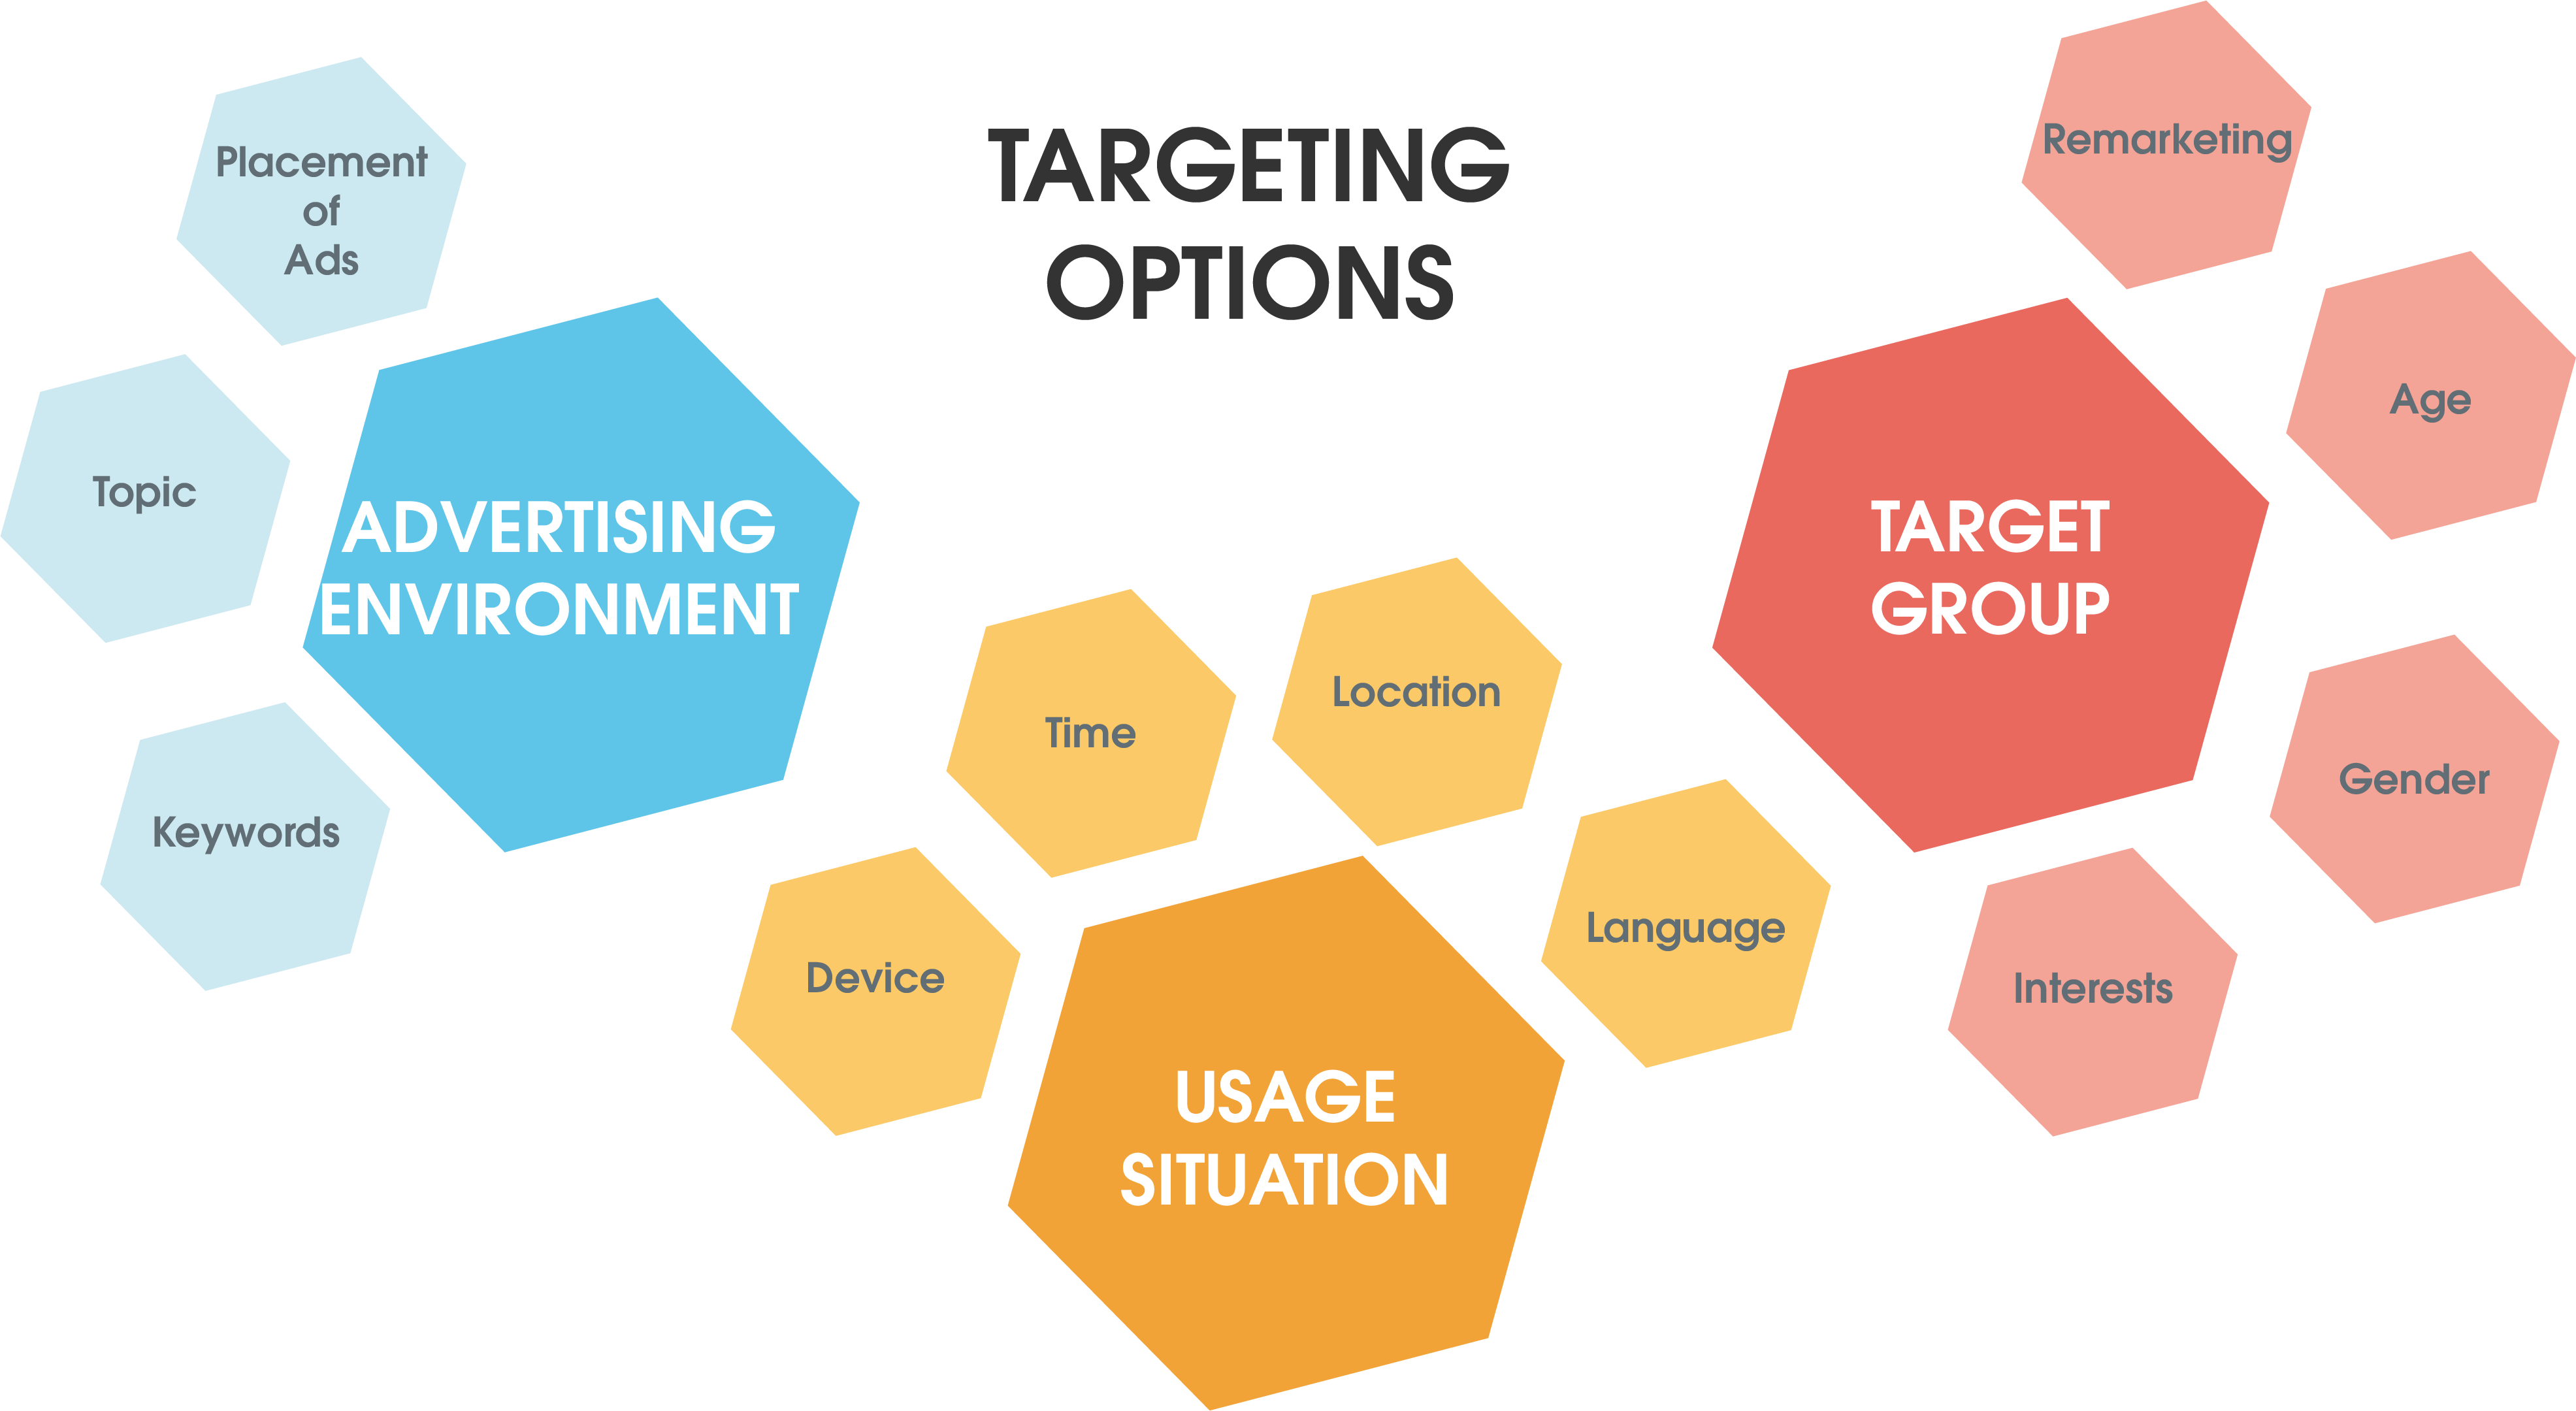 In summary: The individual targeting options in Google Ads
1. Advertising environment: topic, keywords and placement of the ad
2. Usage situation: device, times, location and language
3. Target group: remarketing, age, gender, interests